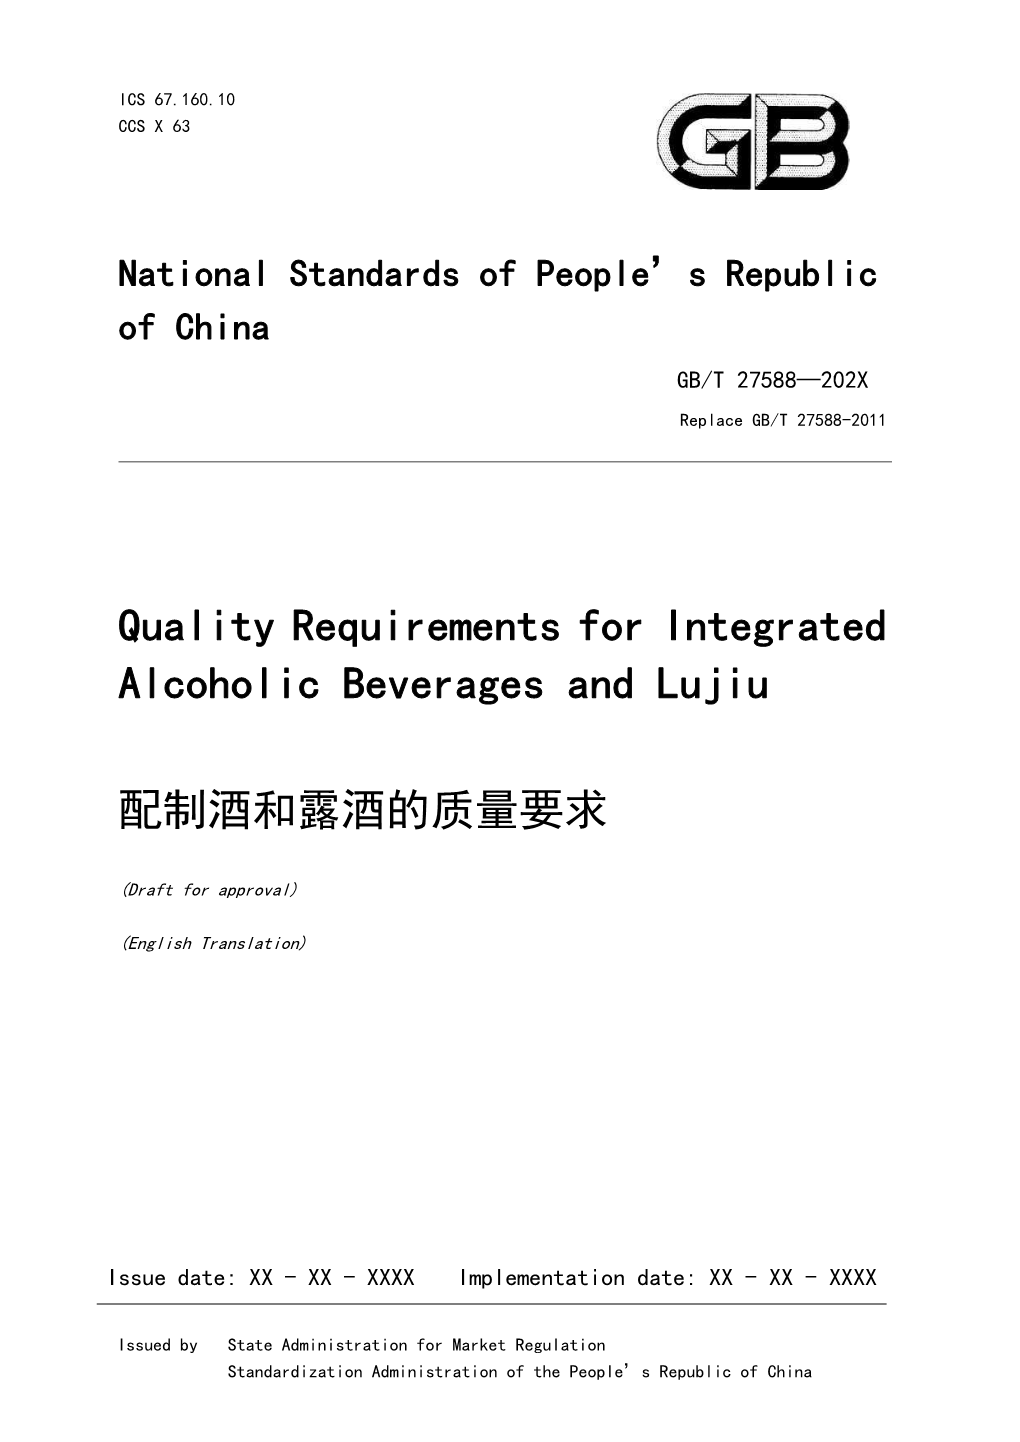 Quality Requirements for Integrated Alcoholic Beverages and Lujiu